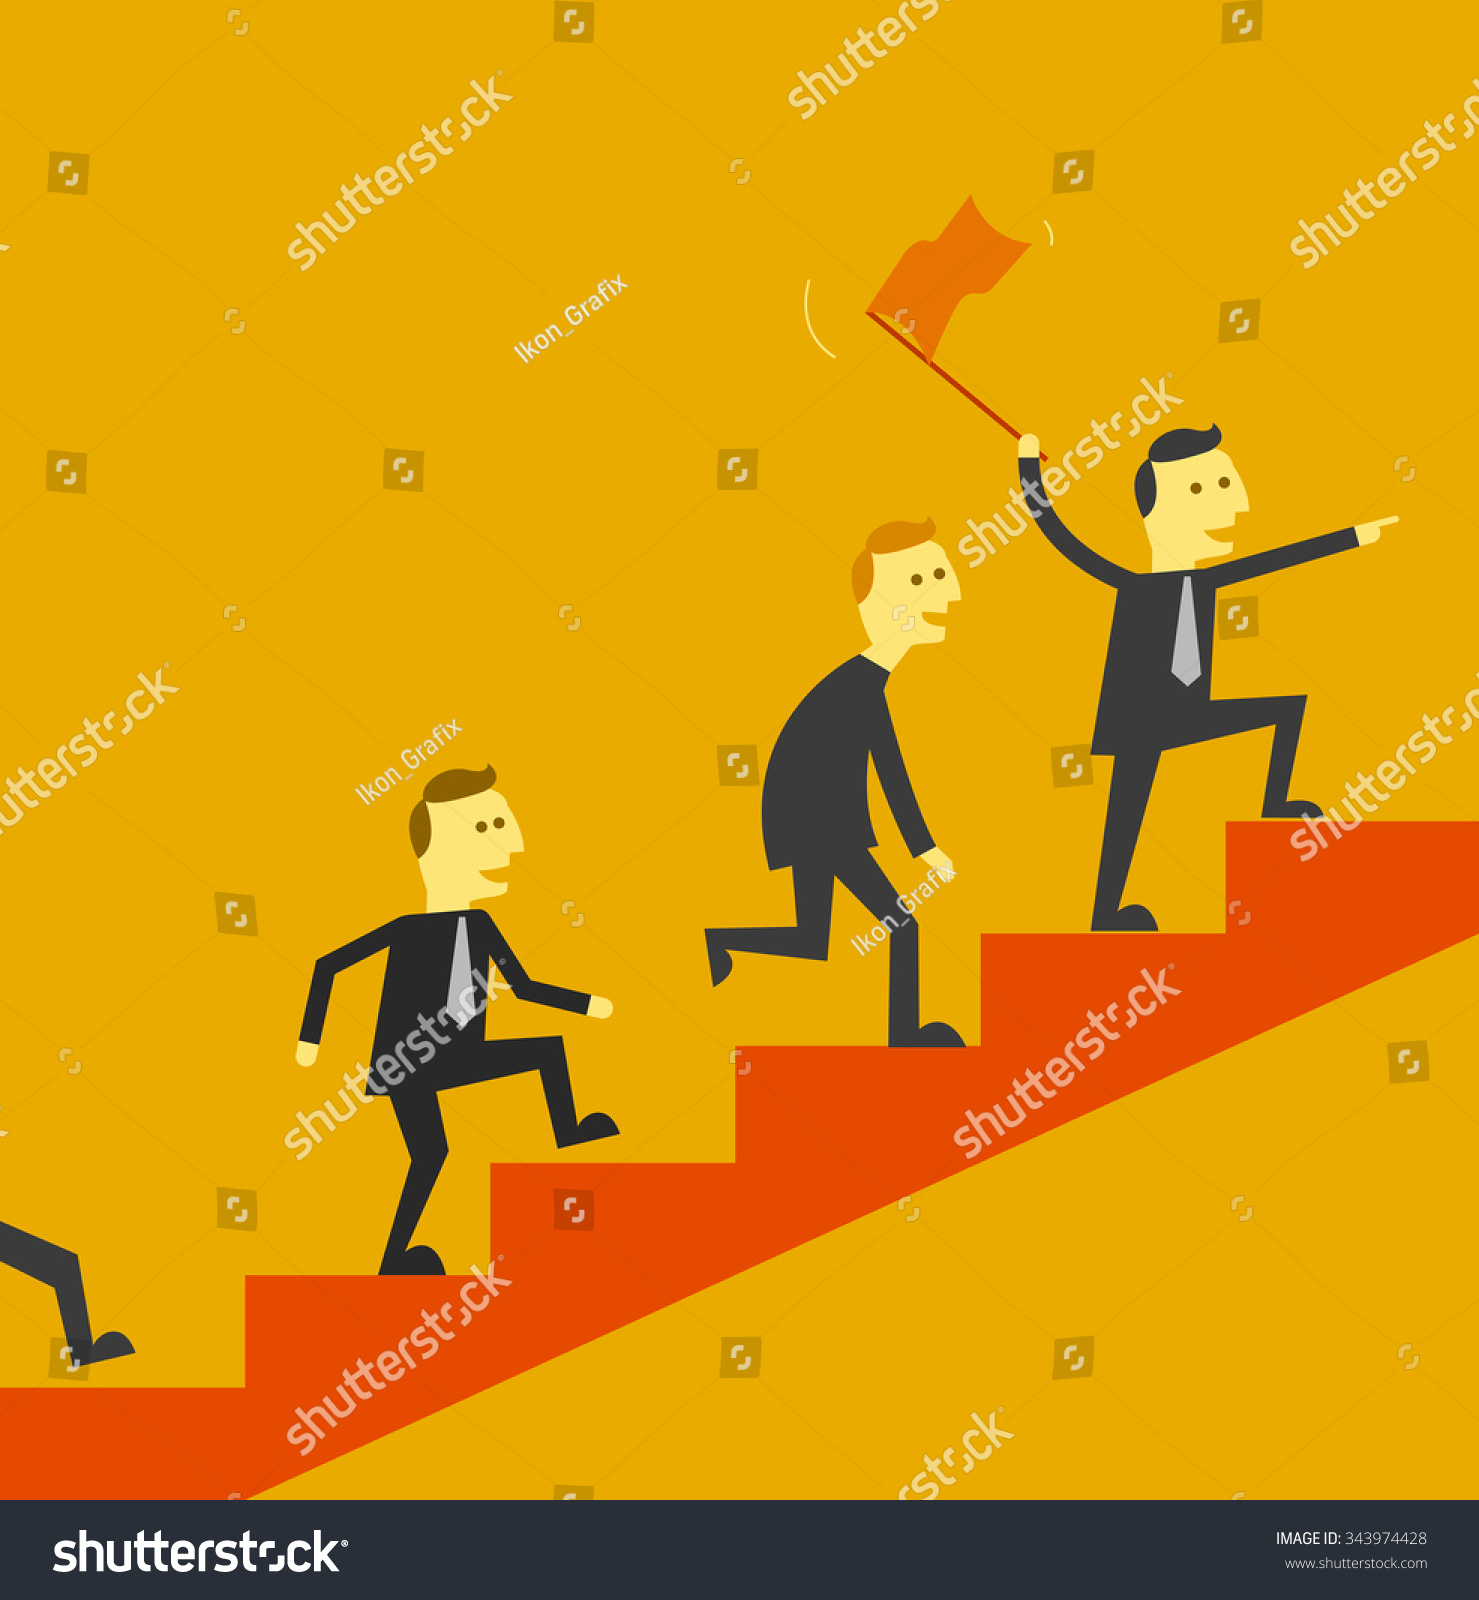 Man Leading A Team Up Stair To Success Stock Vector Illustration ...